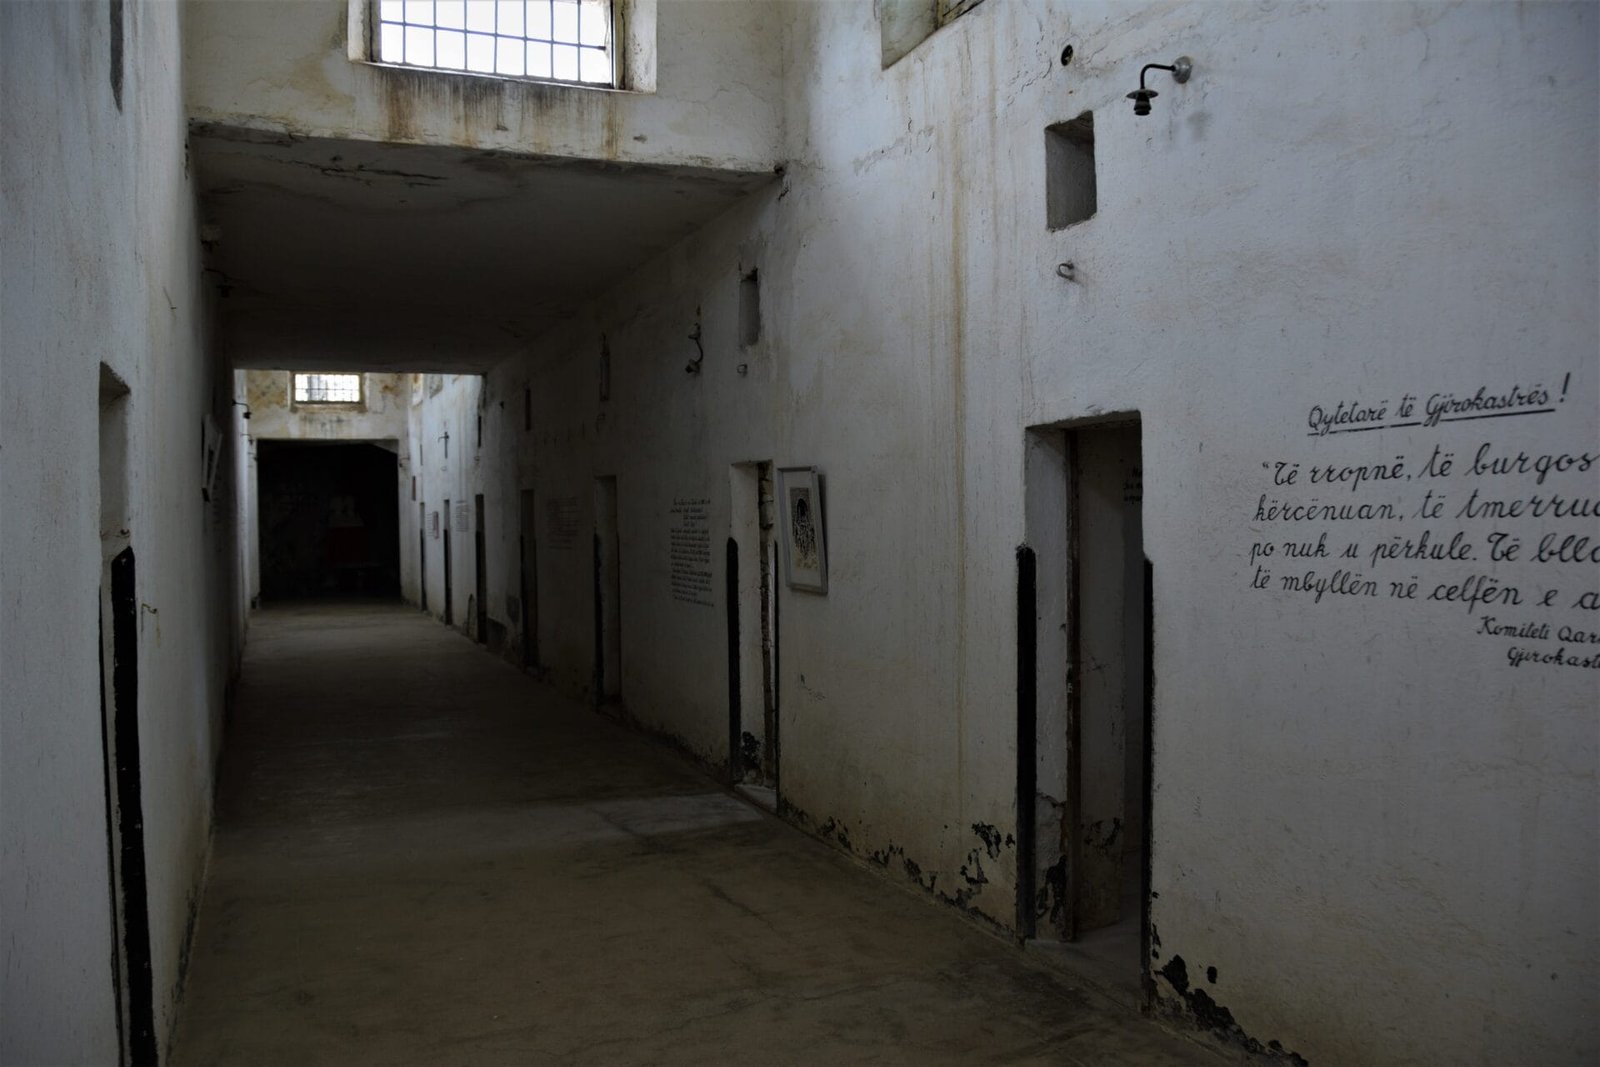 writings on a wall in a hallway of a former prison